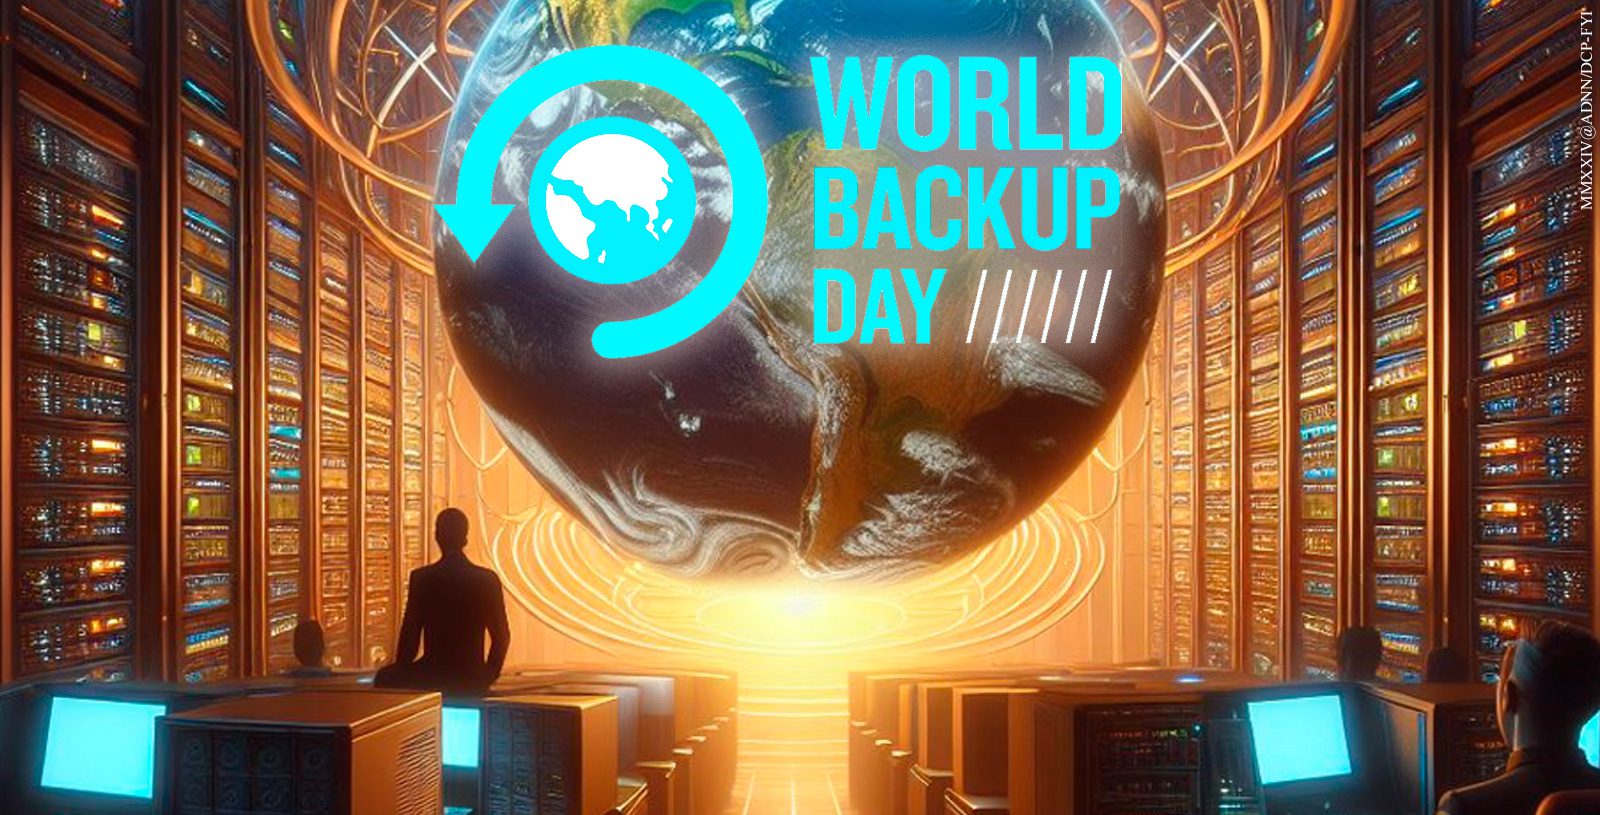 World Backup Day: does yours work or is it a placebo effect?